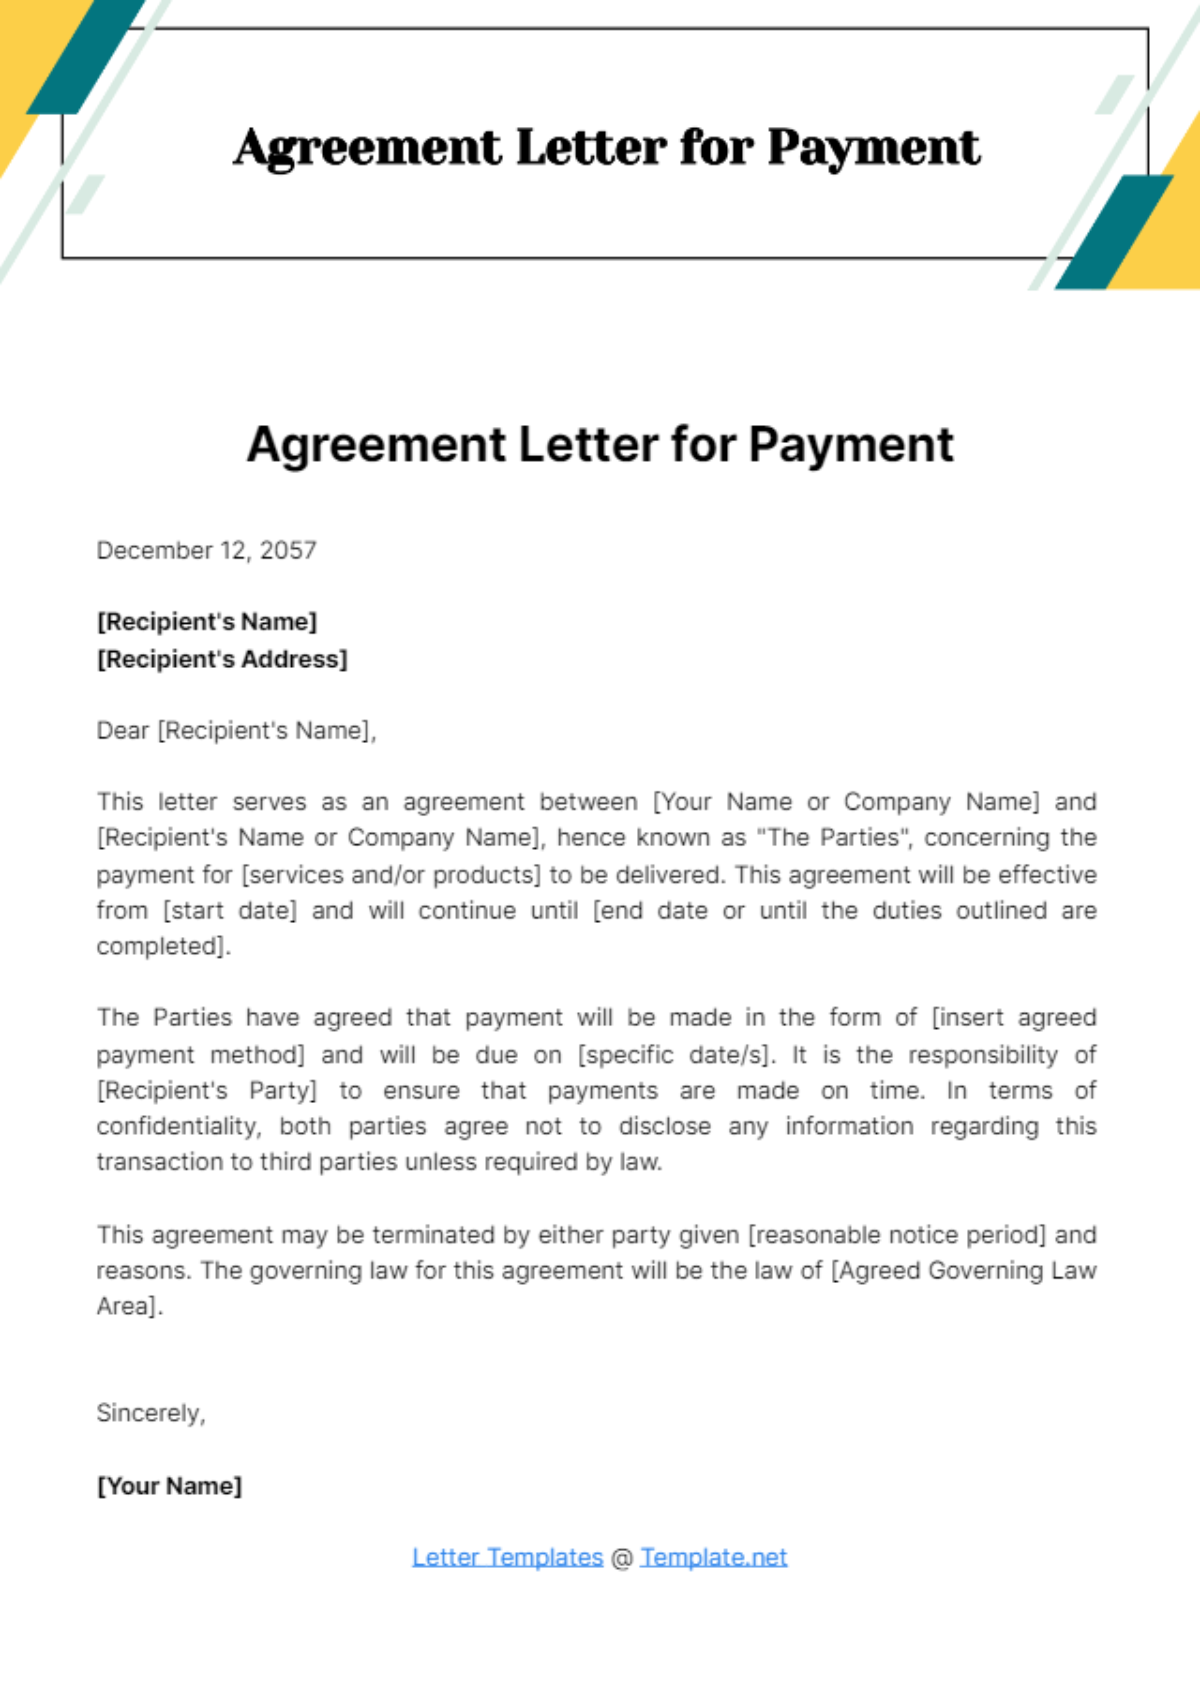 Free Agreement Letter for Payment Template